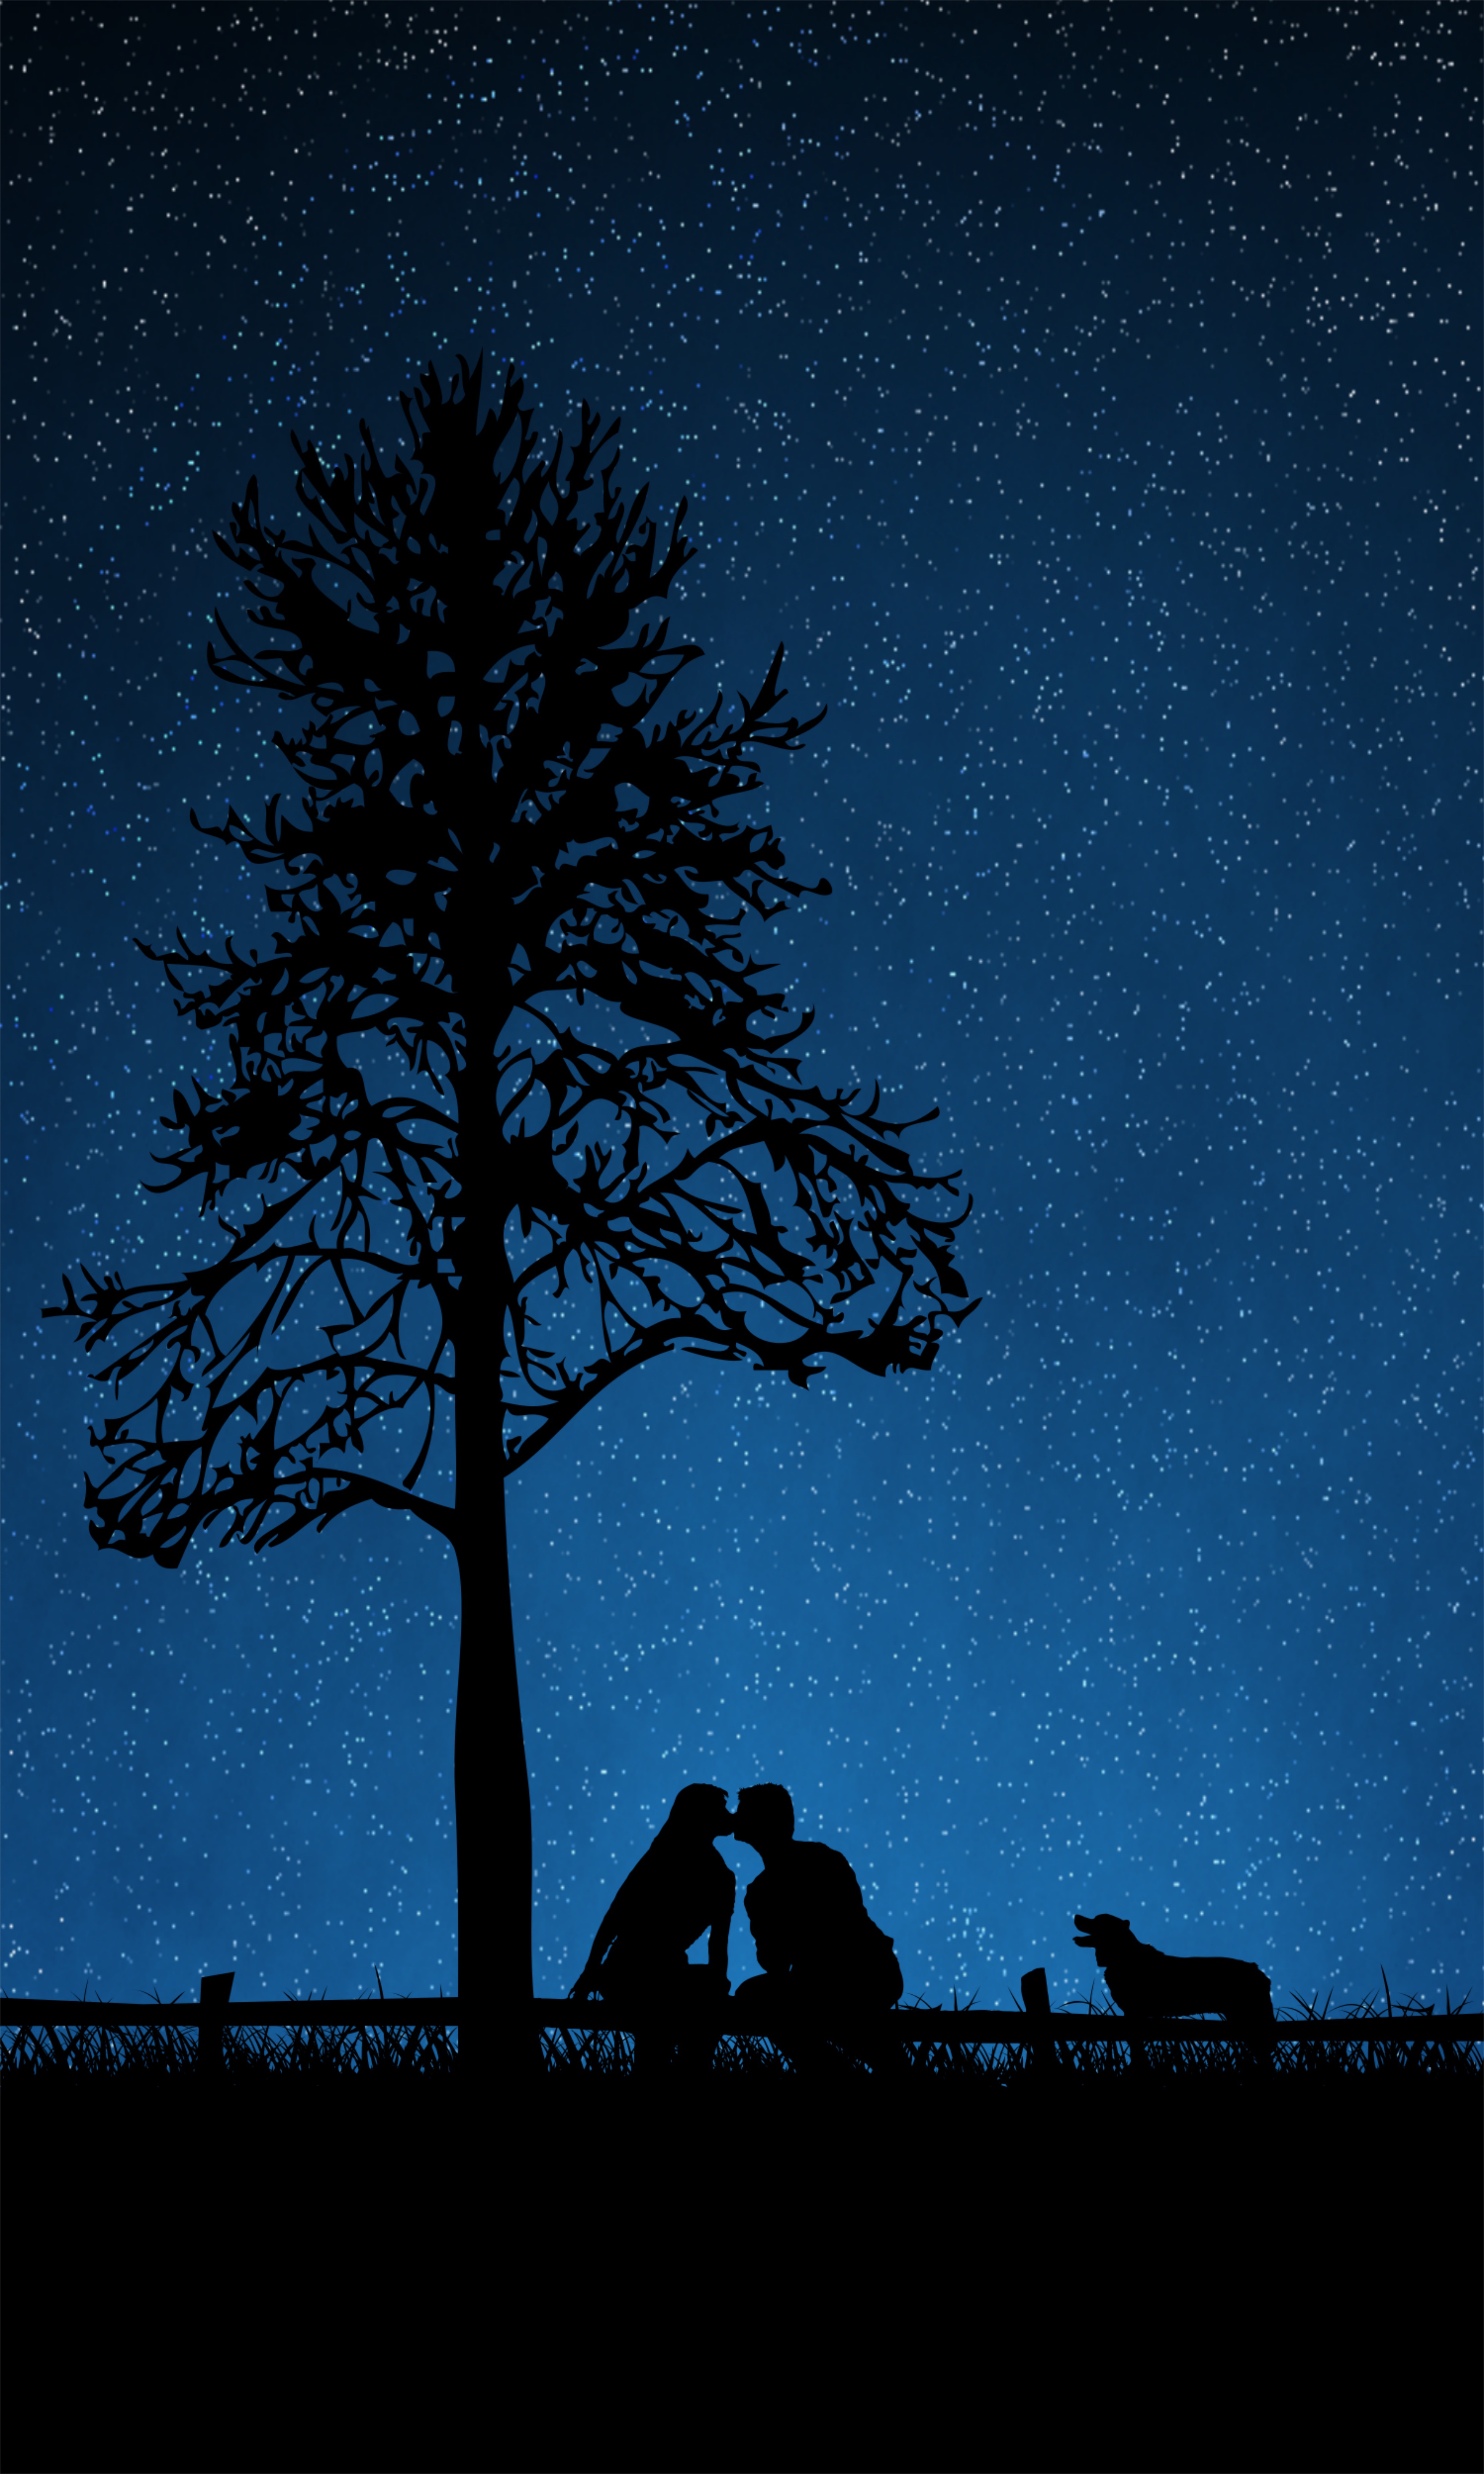 kiss, couple, pair, love, wood, tree, dog, silhouettes, starry sky Full HD